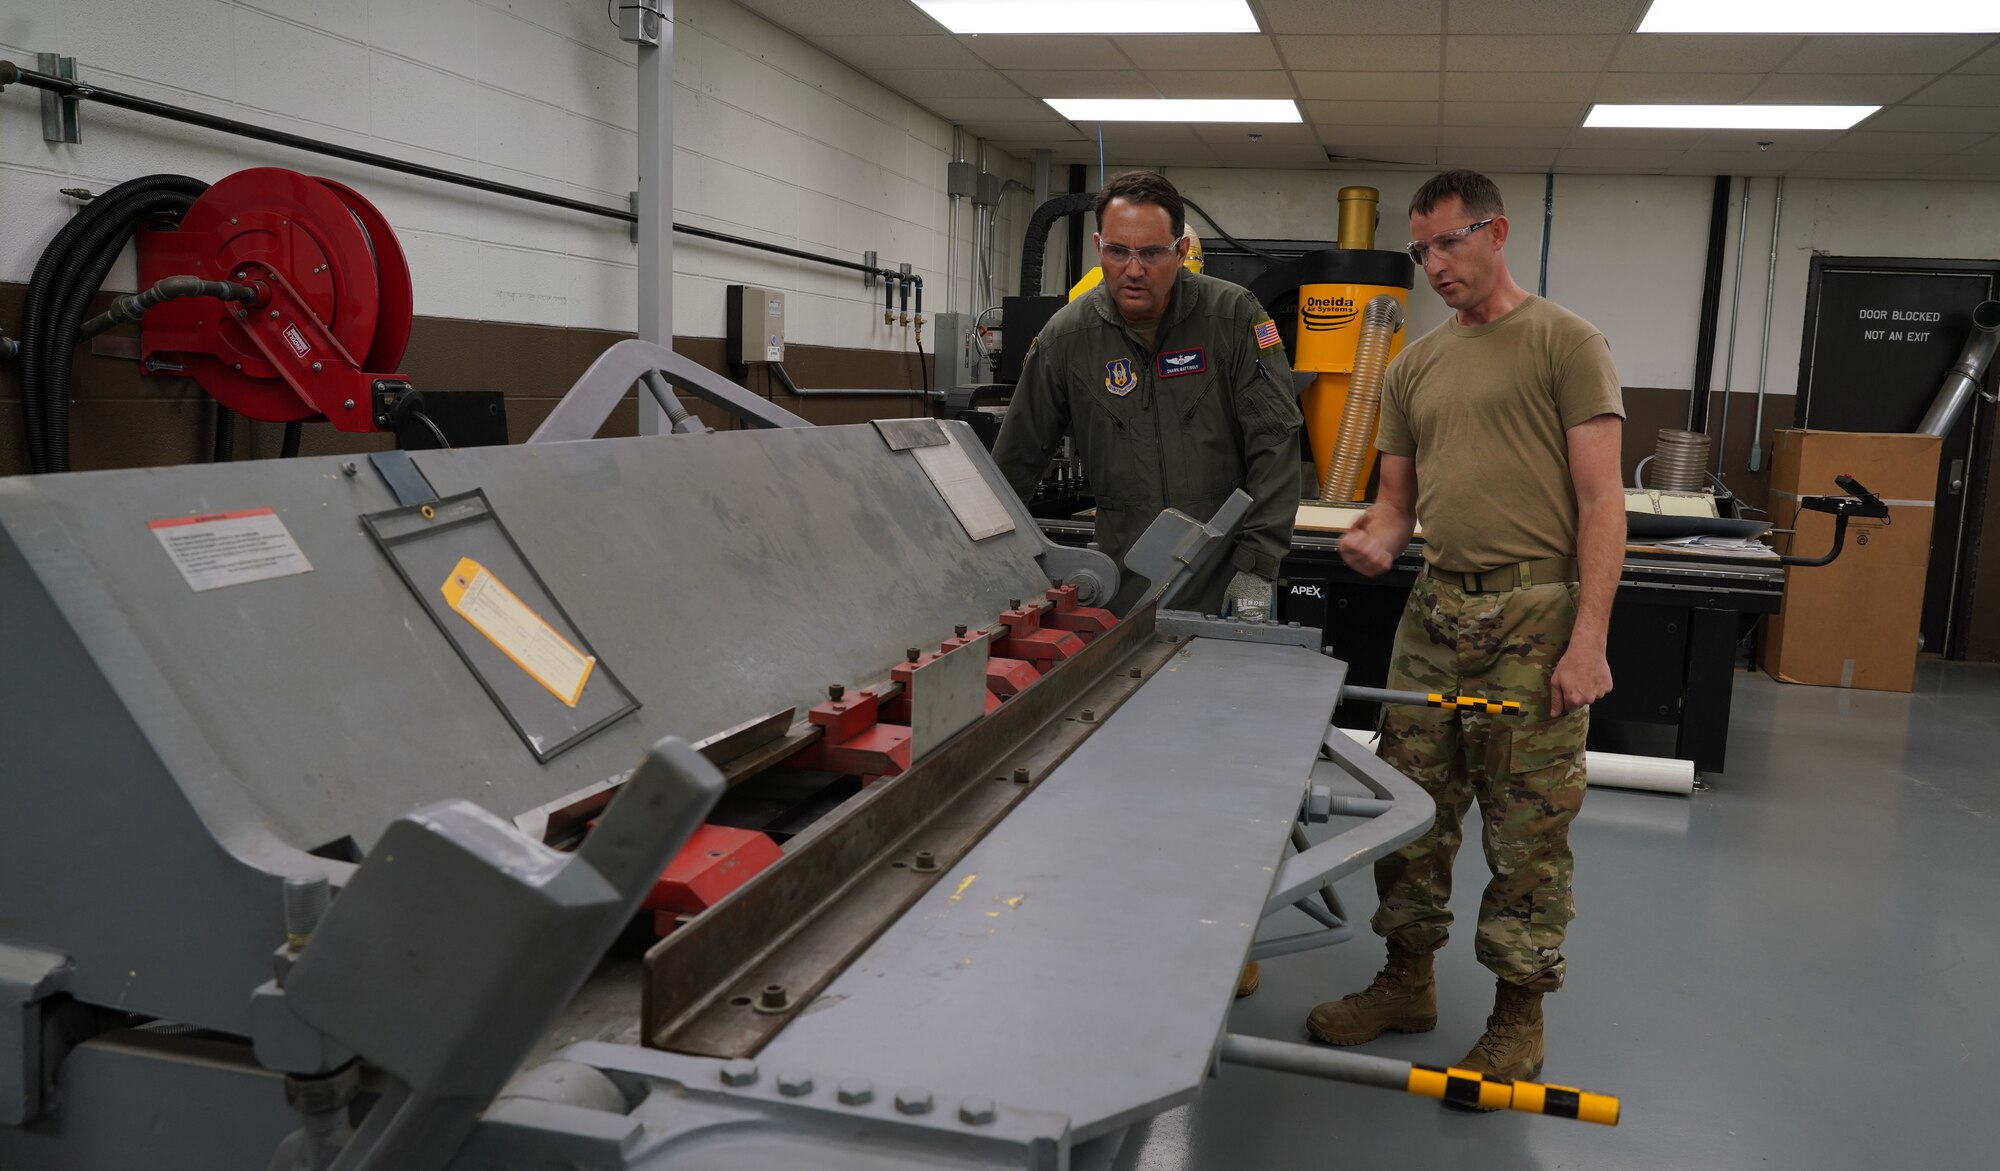 Master Sgt. explains how to read the angles when bending the sheet metal.